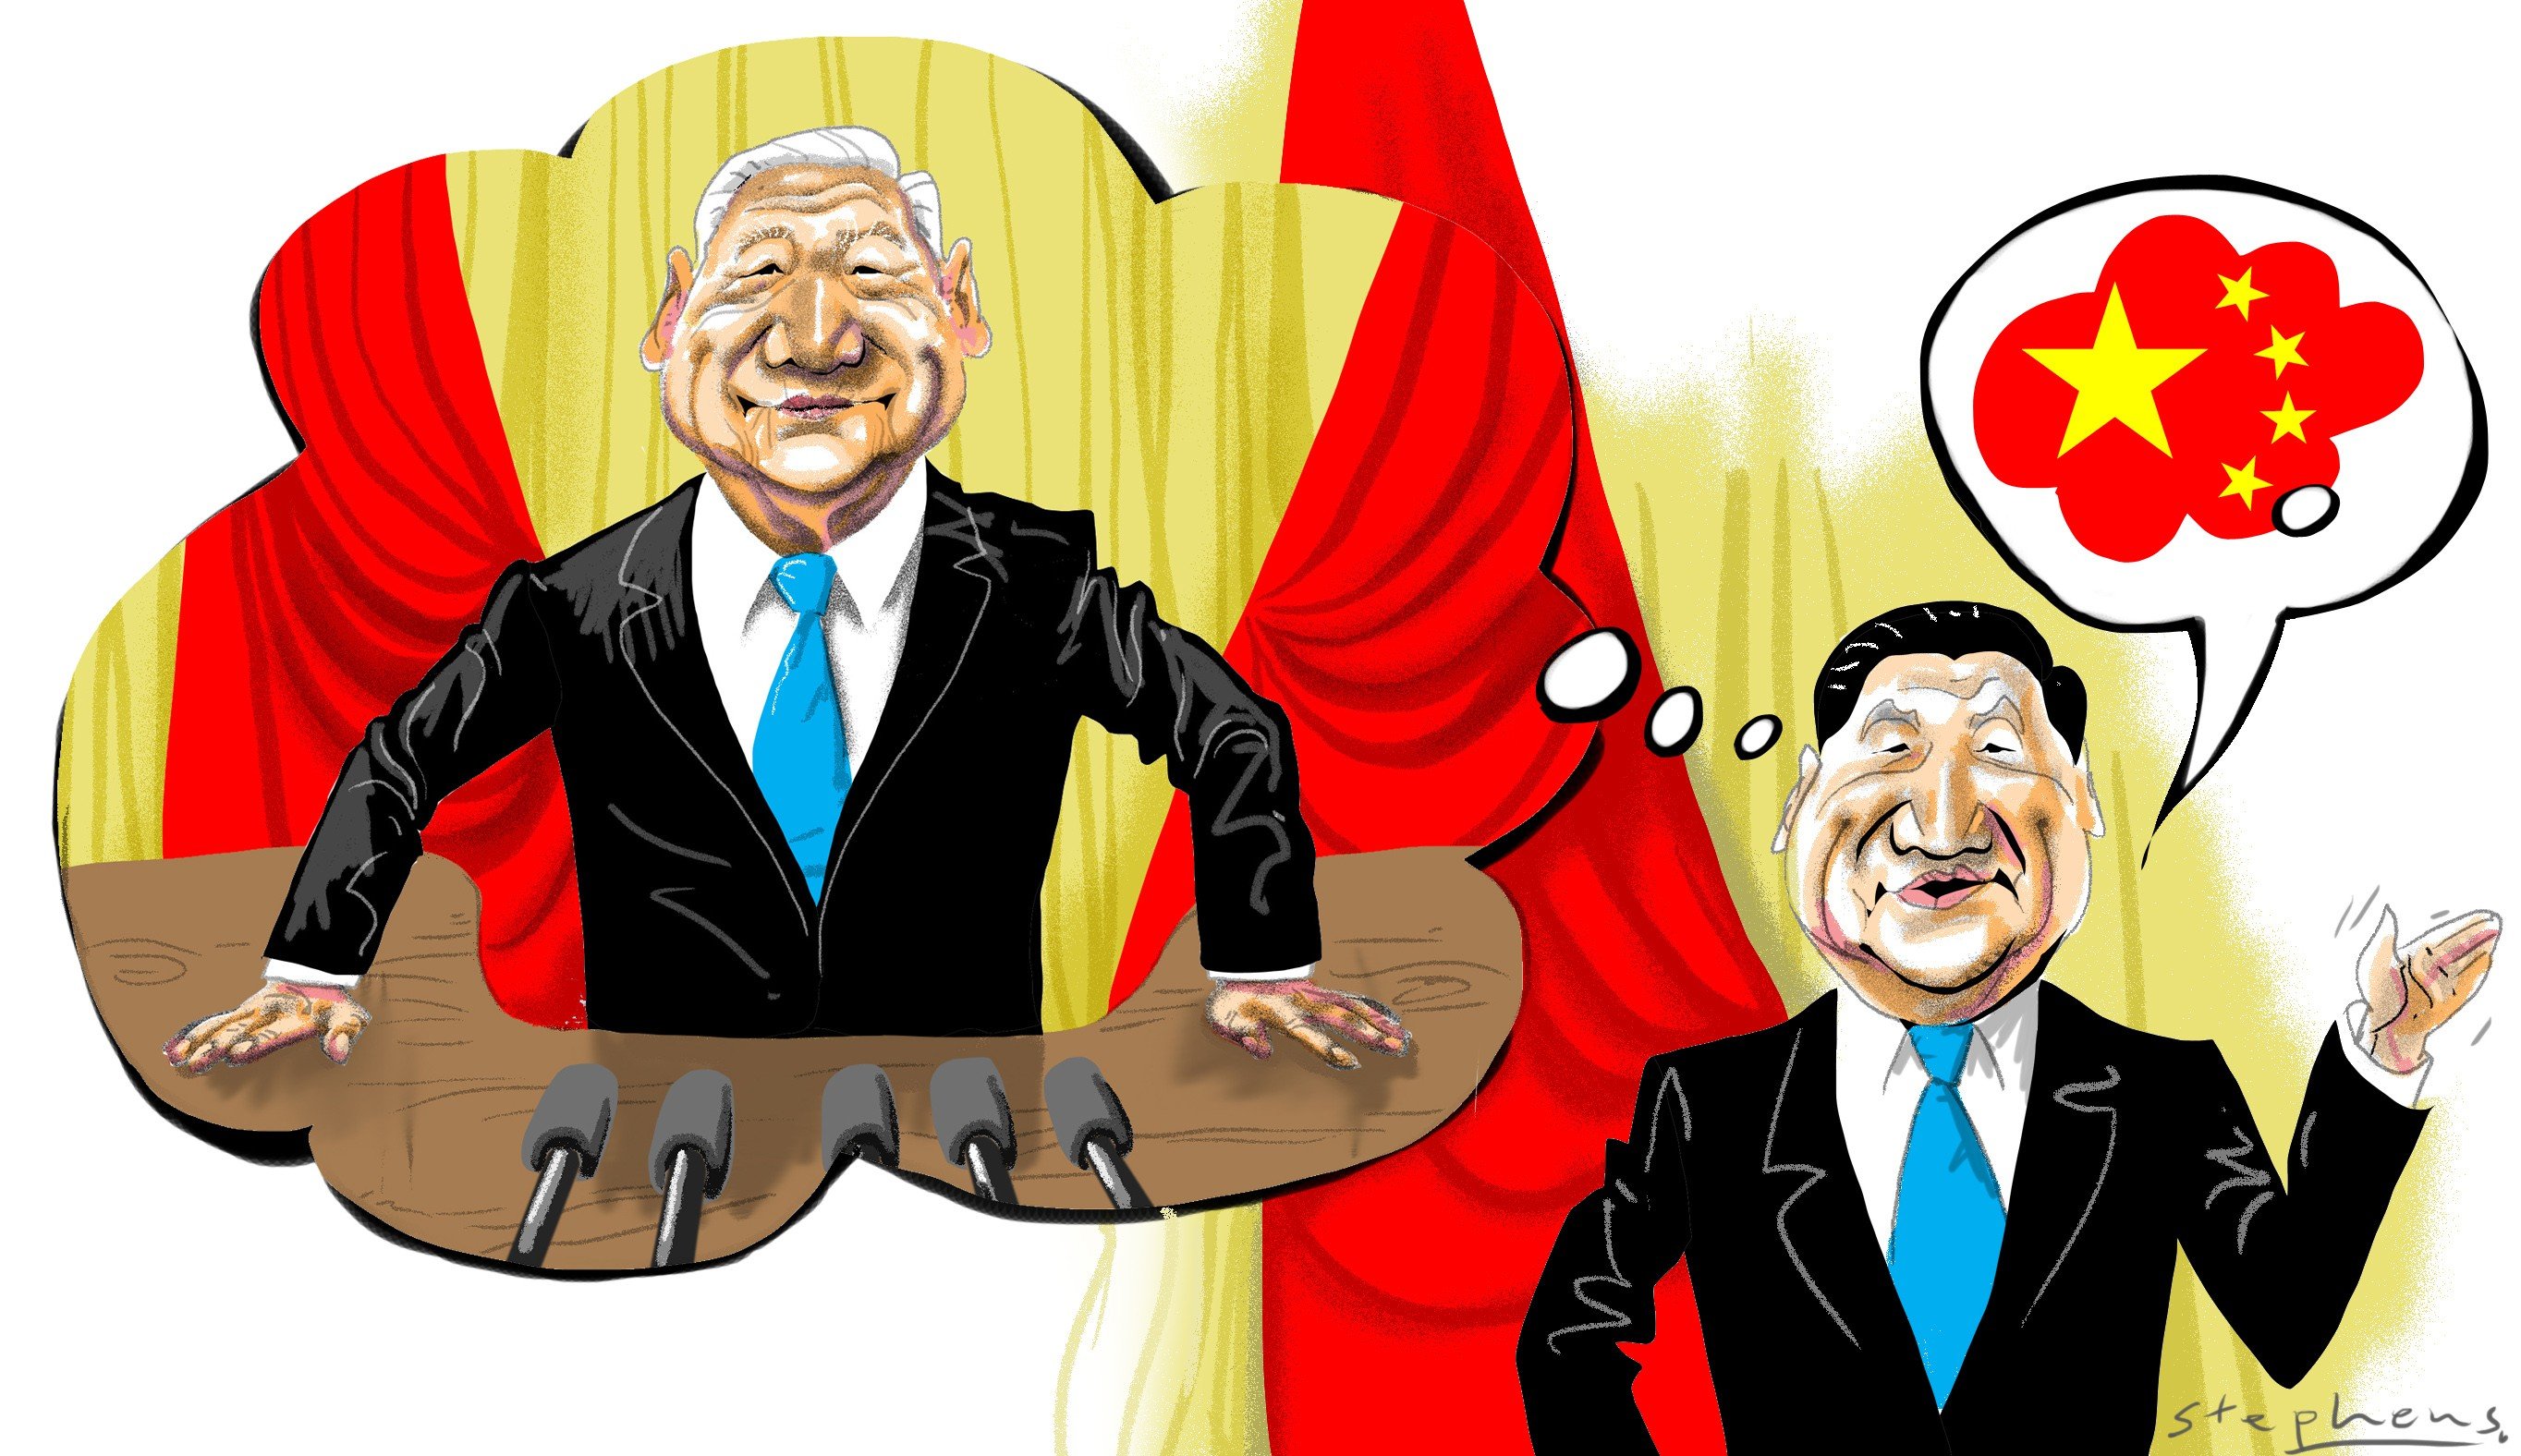 Xi Jinping is giving notice that he intends to stay on as president to carry on with the work of national rejuvenation. But the removal of a necessary check on a leader’s power carries its own risks. Illustration: Craig Stephens